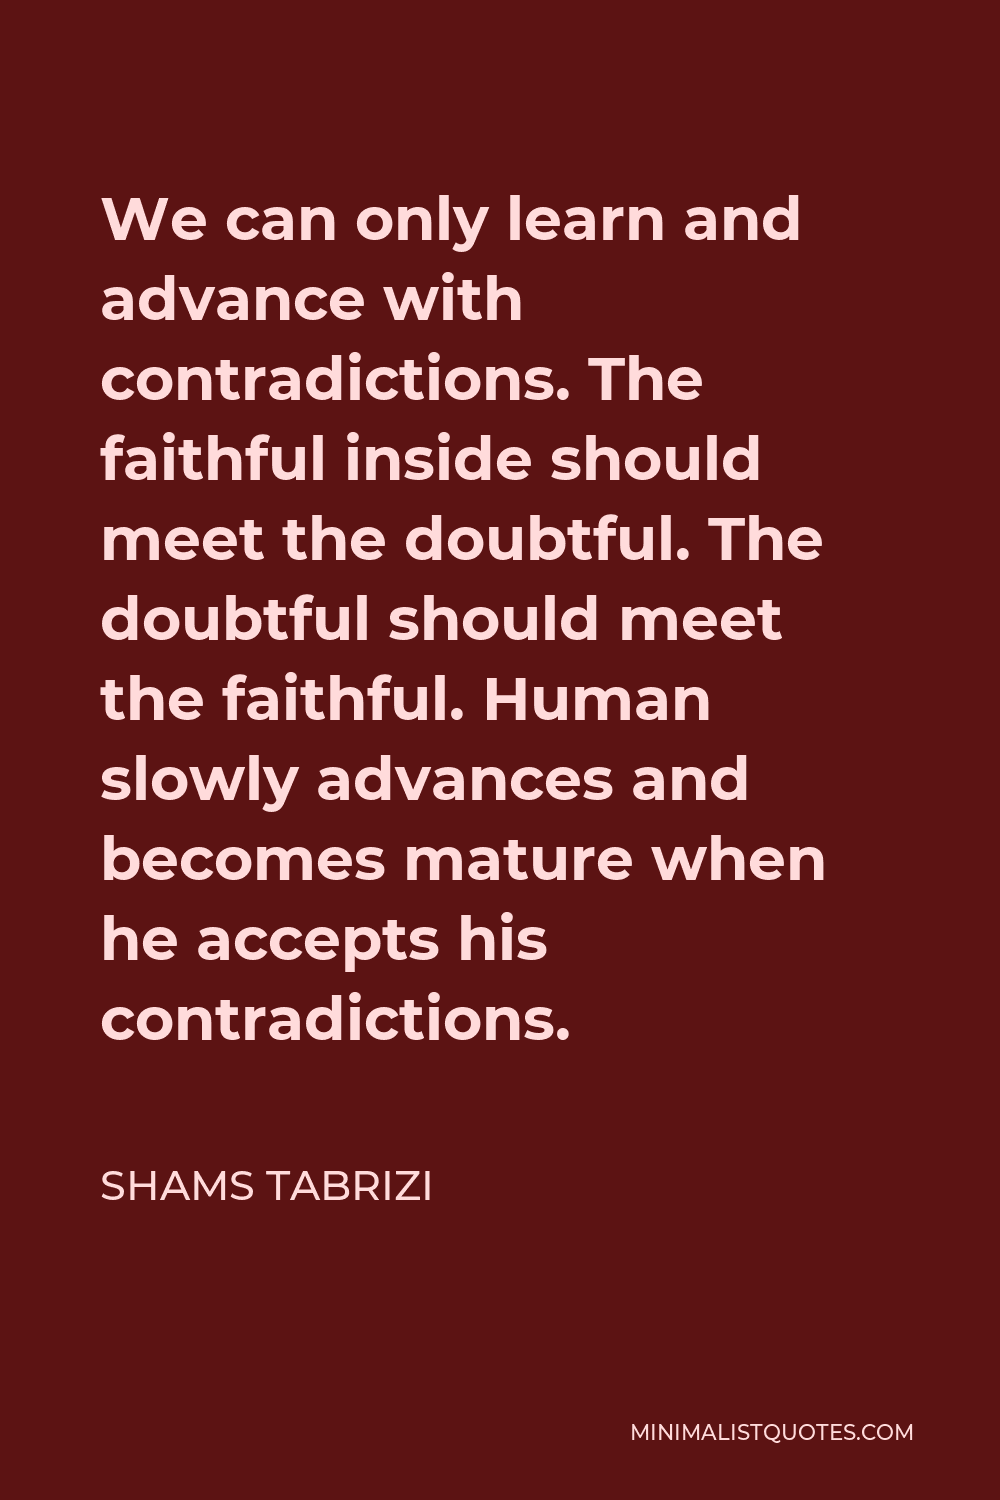 Shams Tabrizi Quote - We can only learn and advance with contradictions. The faithful inside should meet the doubtful. The doubtful should meet the faithful. Human slowly advances and becomes mature when he accepts his contradictions.